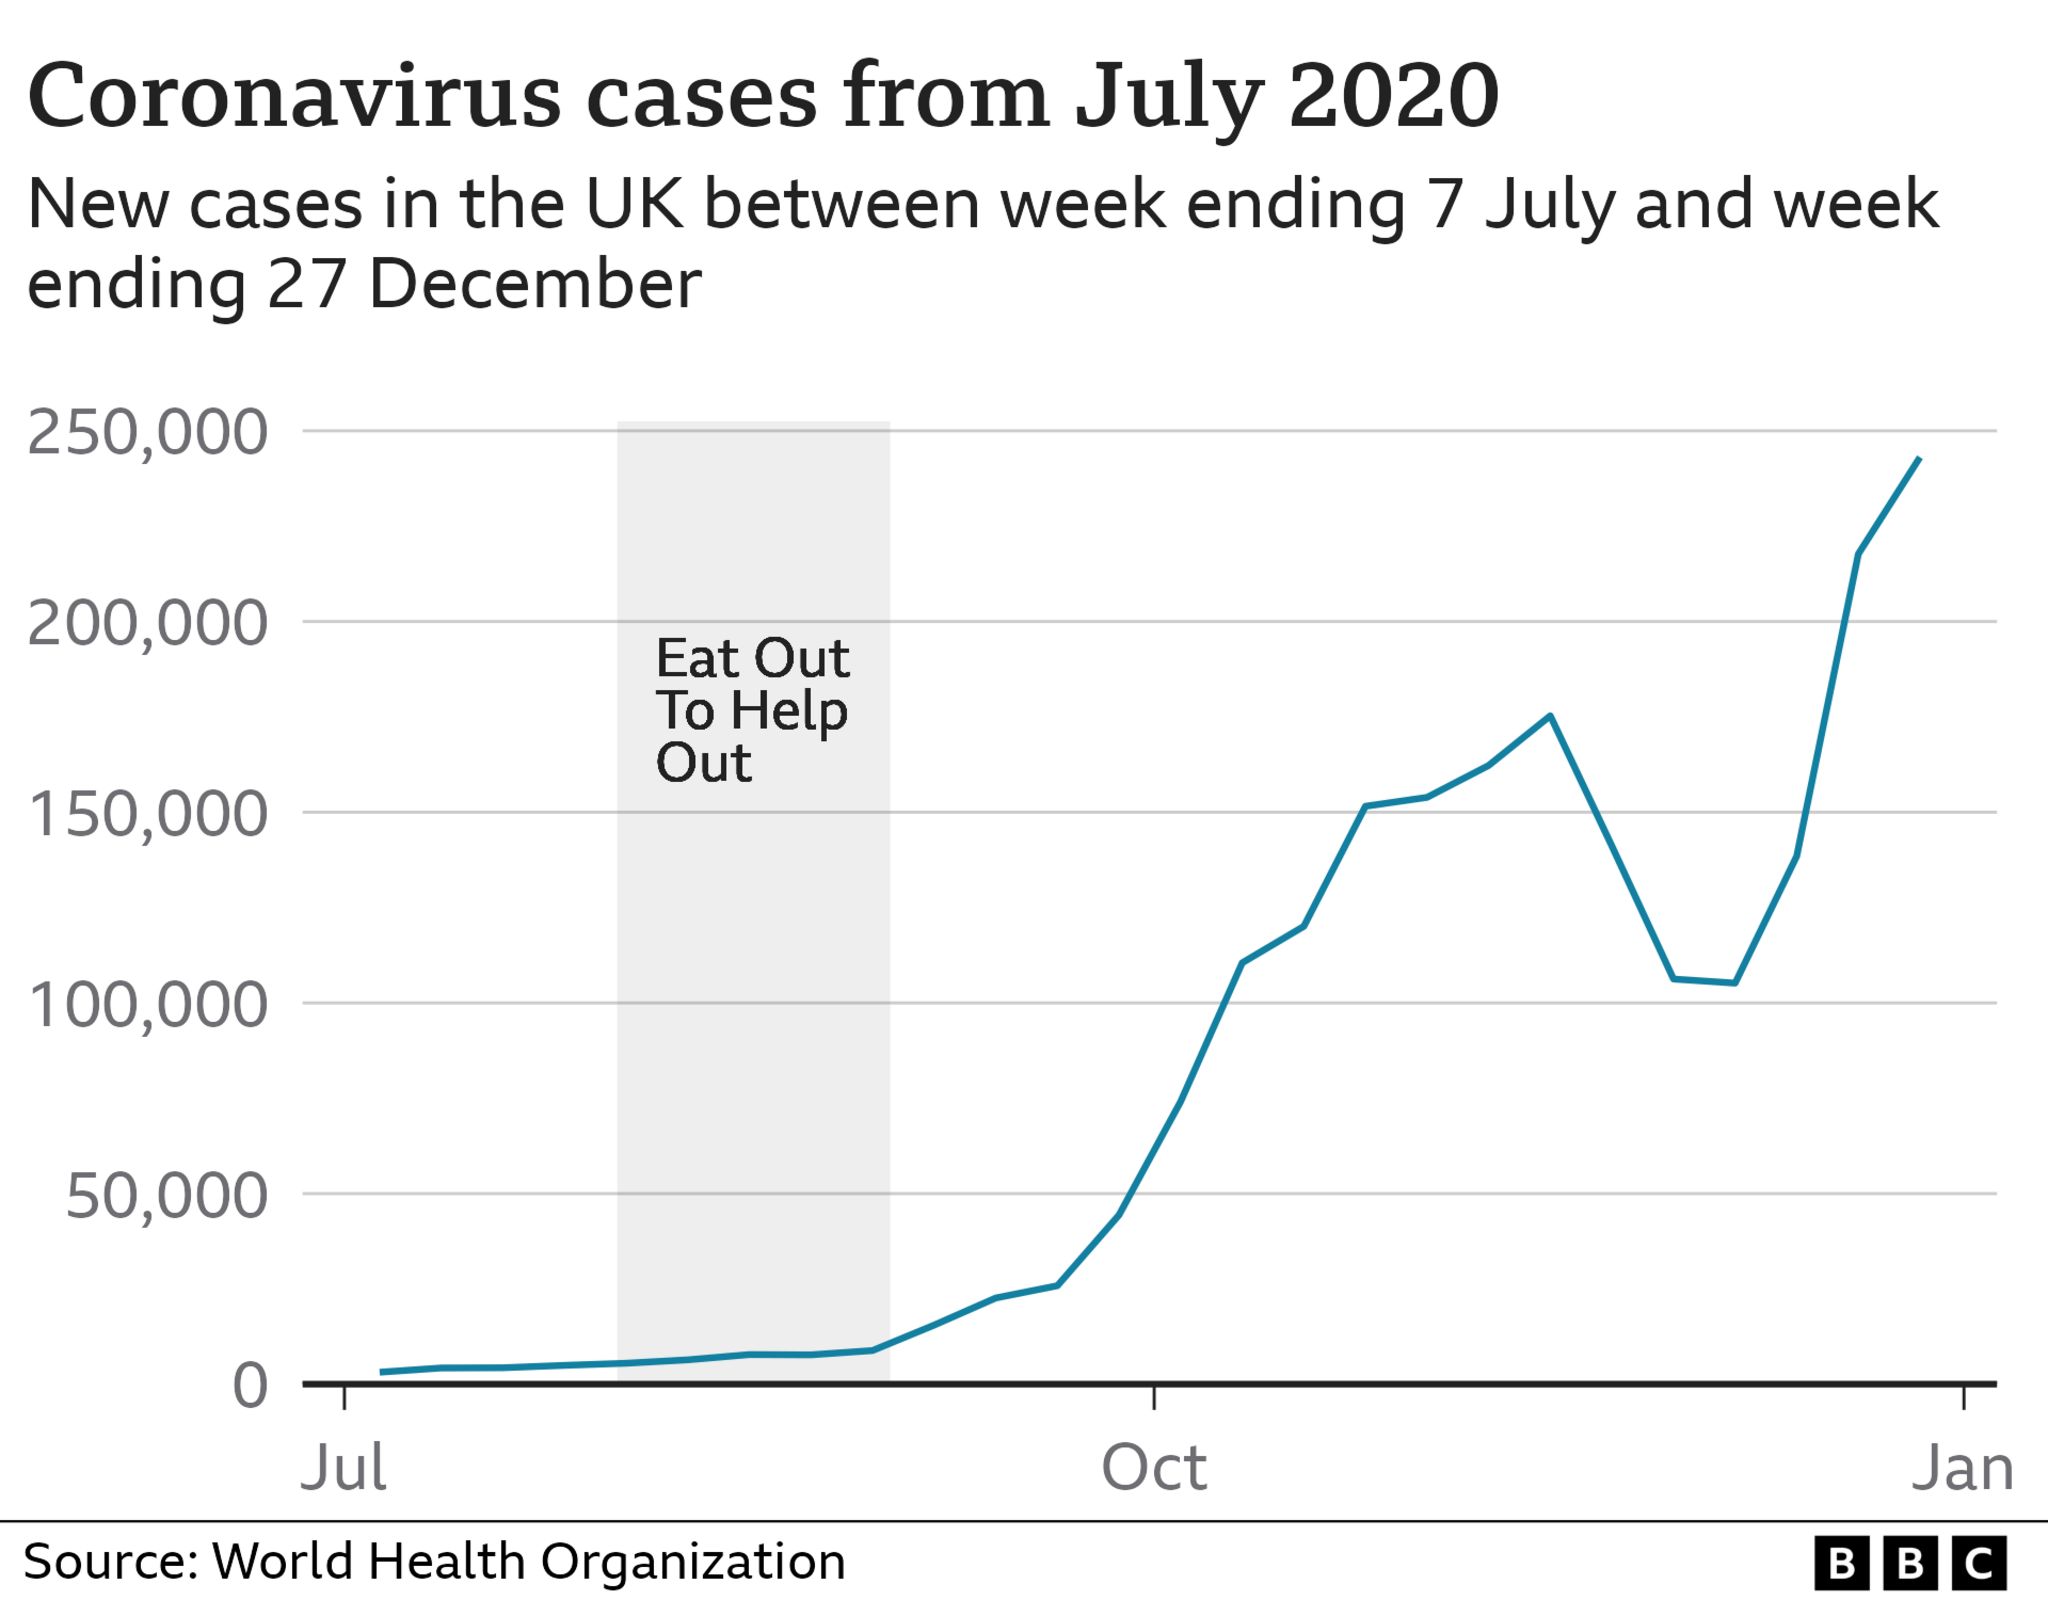 A graph showing Covid cases in the UK from 7 July to 27 December 2020, with a sharp rise of cases from September